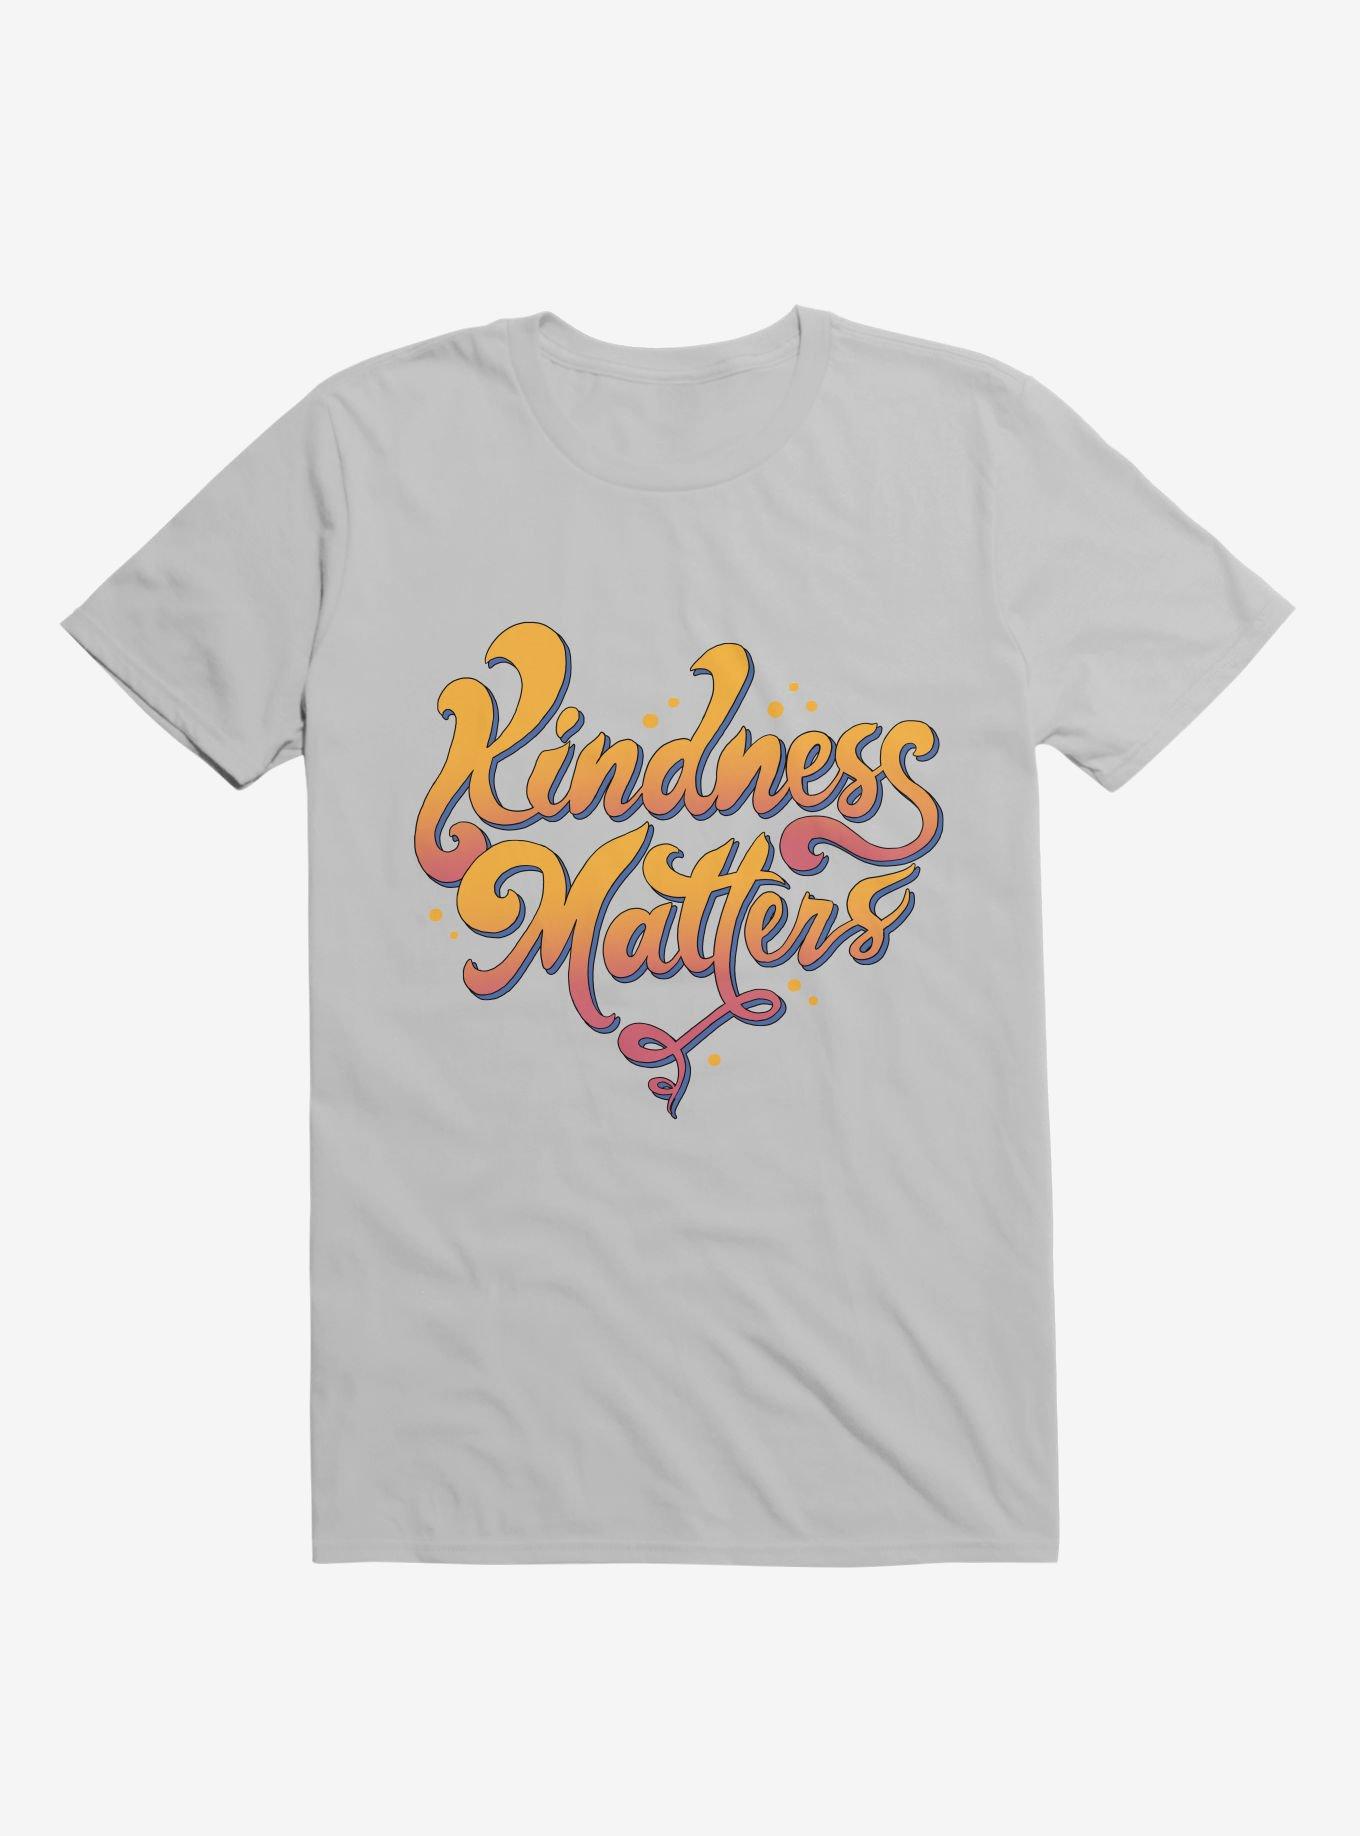 Kindness Matters Ice Grey T-Shirt, ICE GREY, hi-res